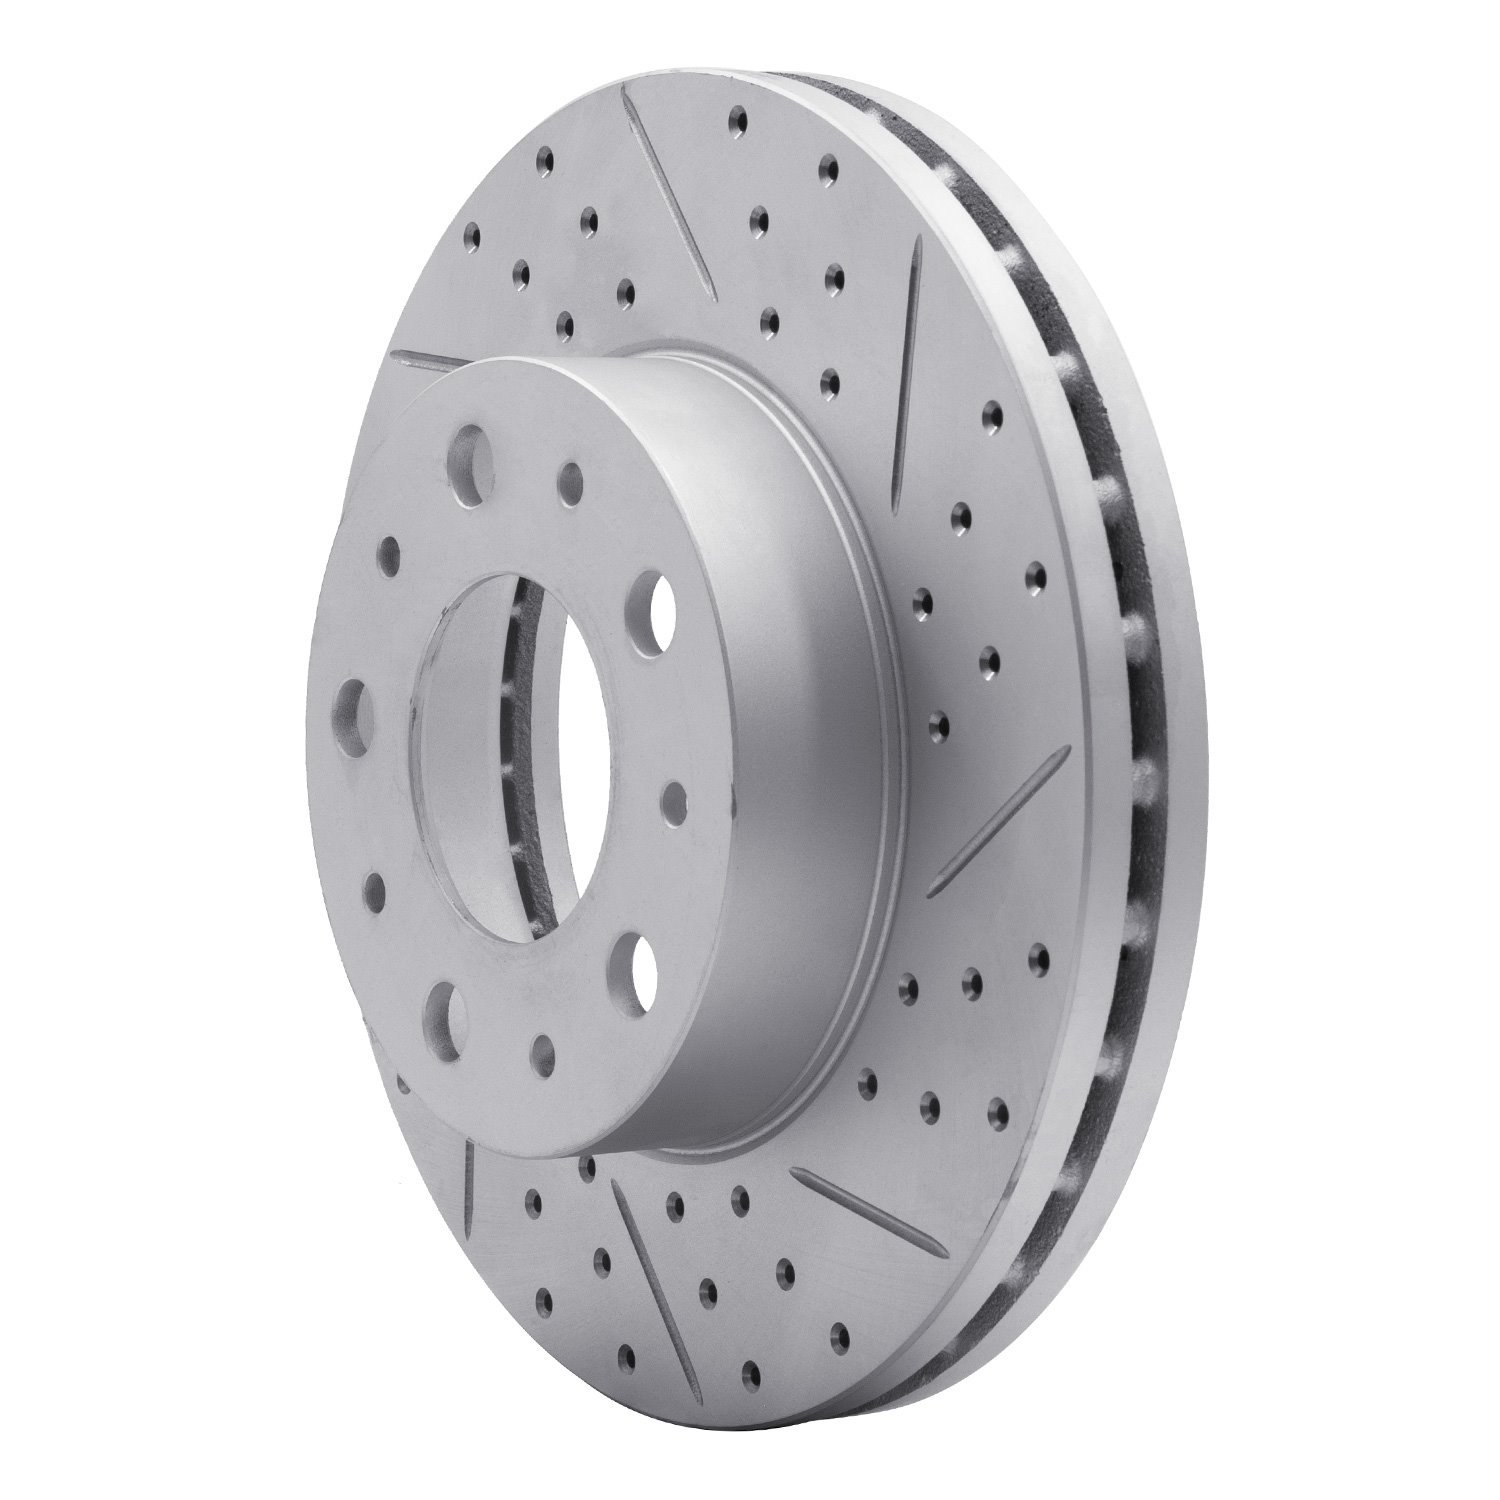 830-40114R Geoperformance Drilled/Slotted Brake Rotor, Fits Select Mopar, Position: Front Right